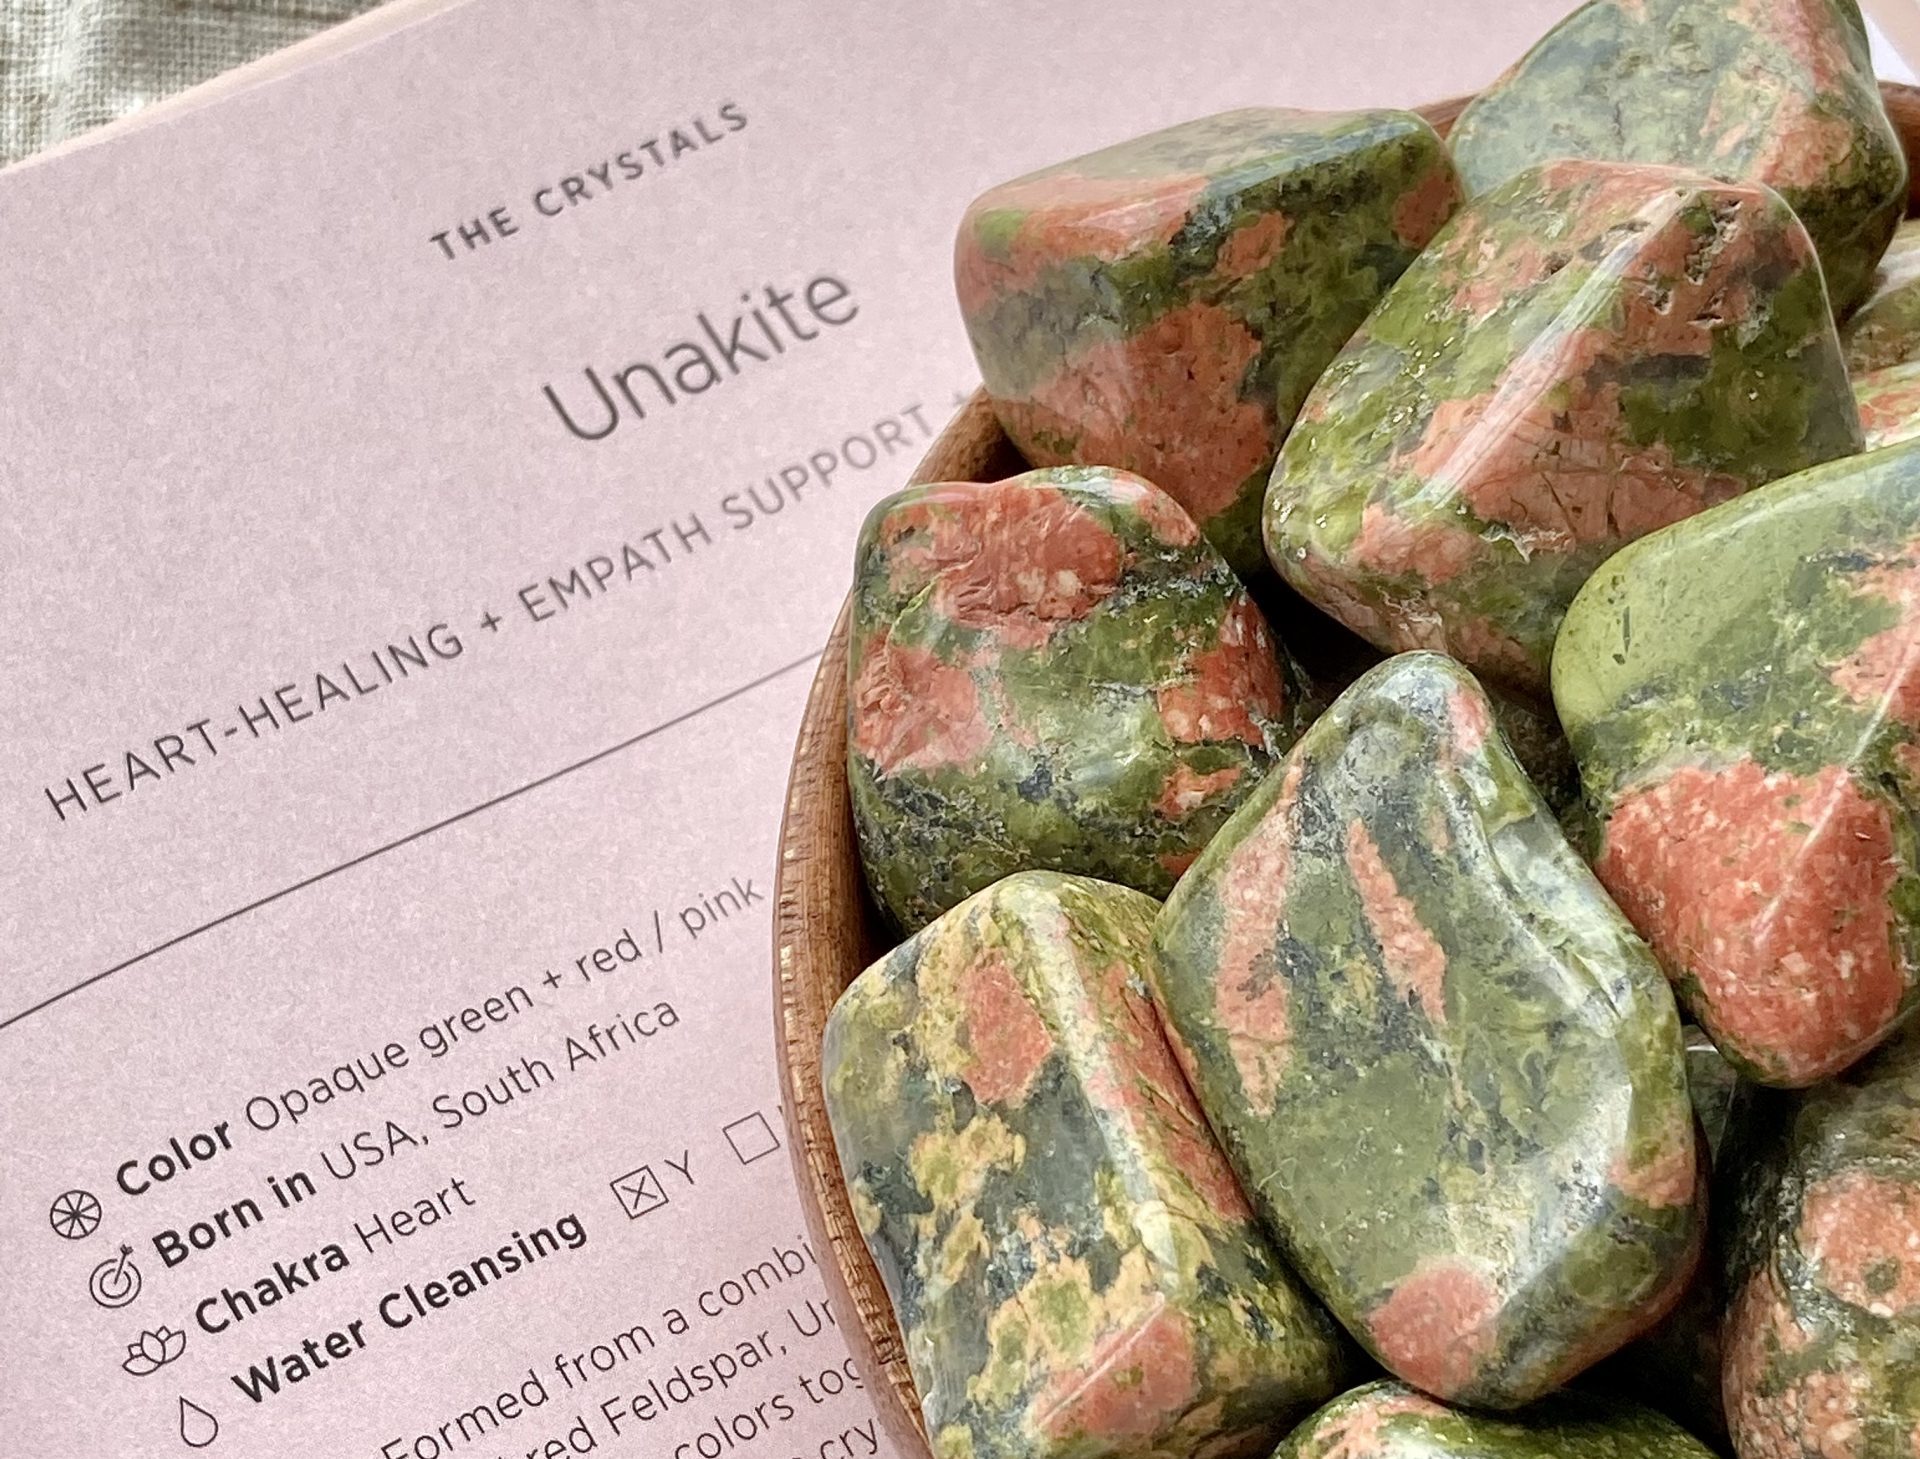 healing stones and their meanings